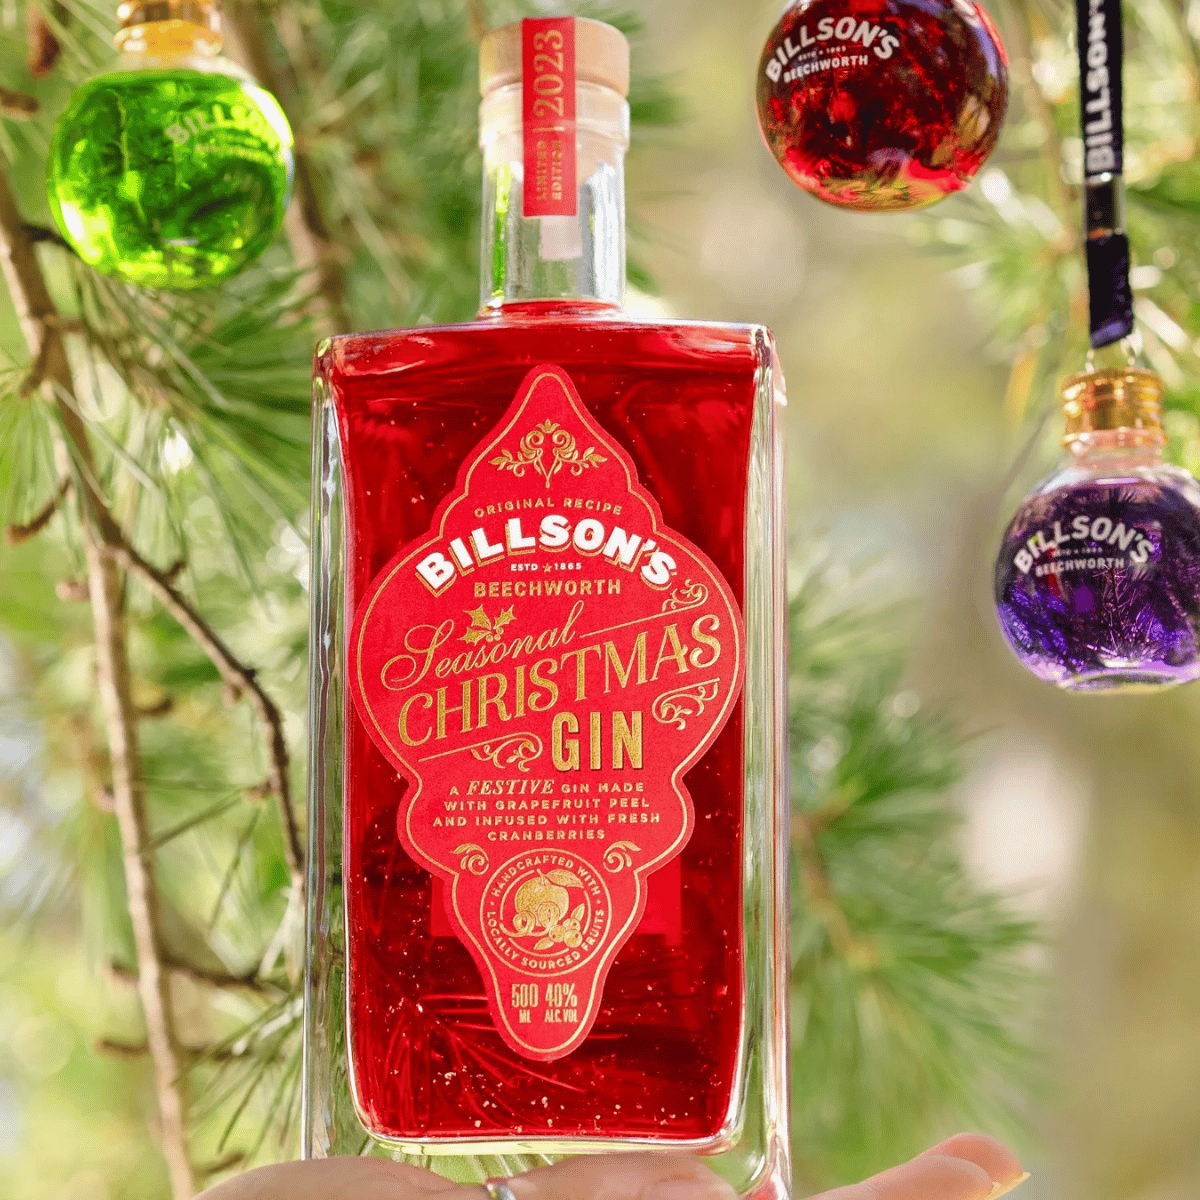 An image of a bottle of Christmas gin held up against a backdrop of a festive tree.